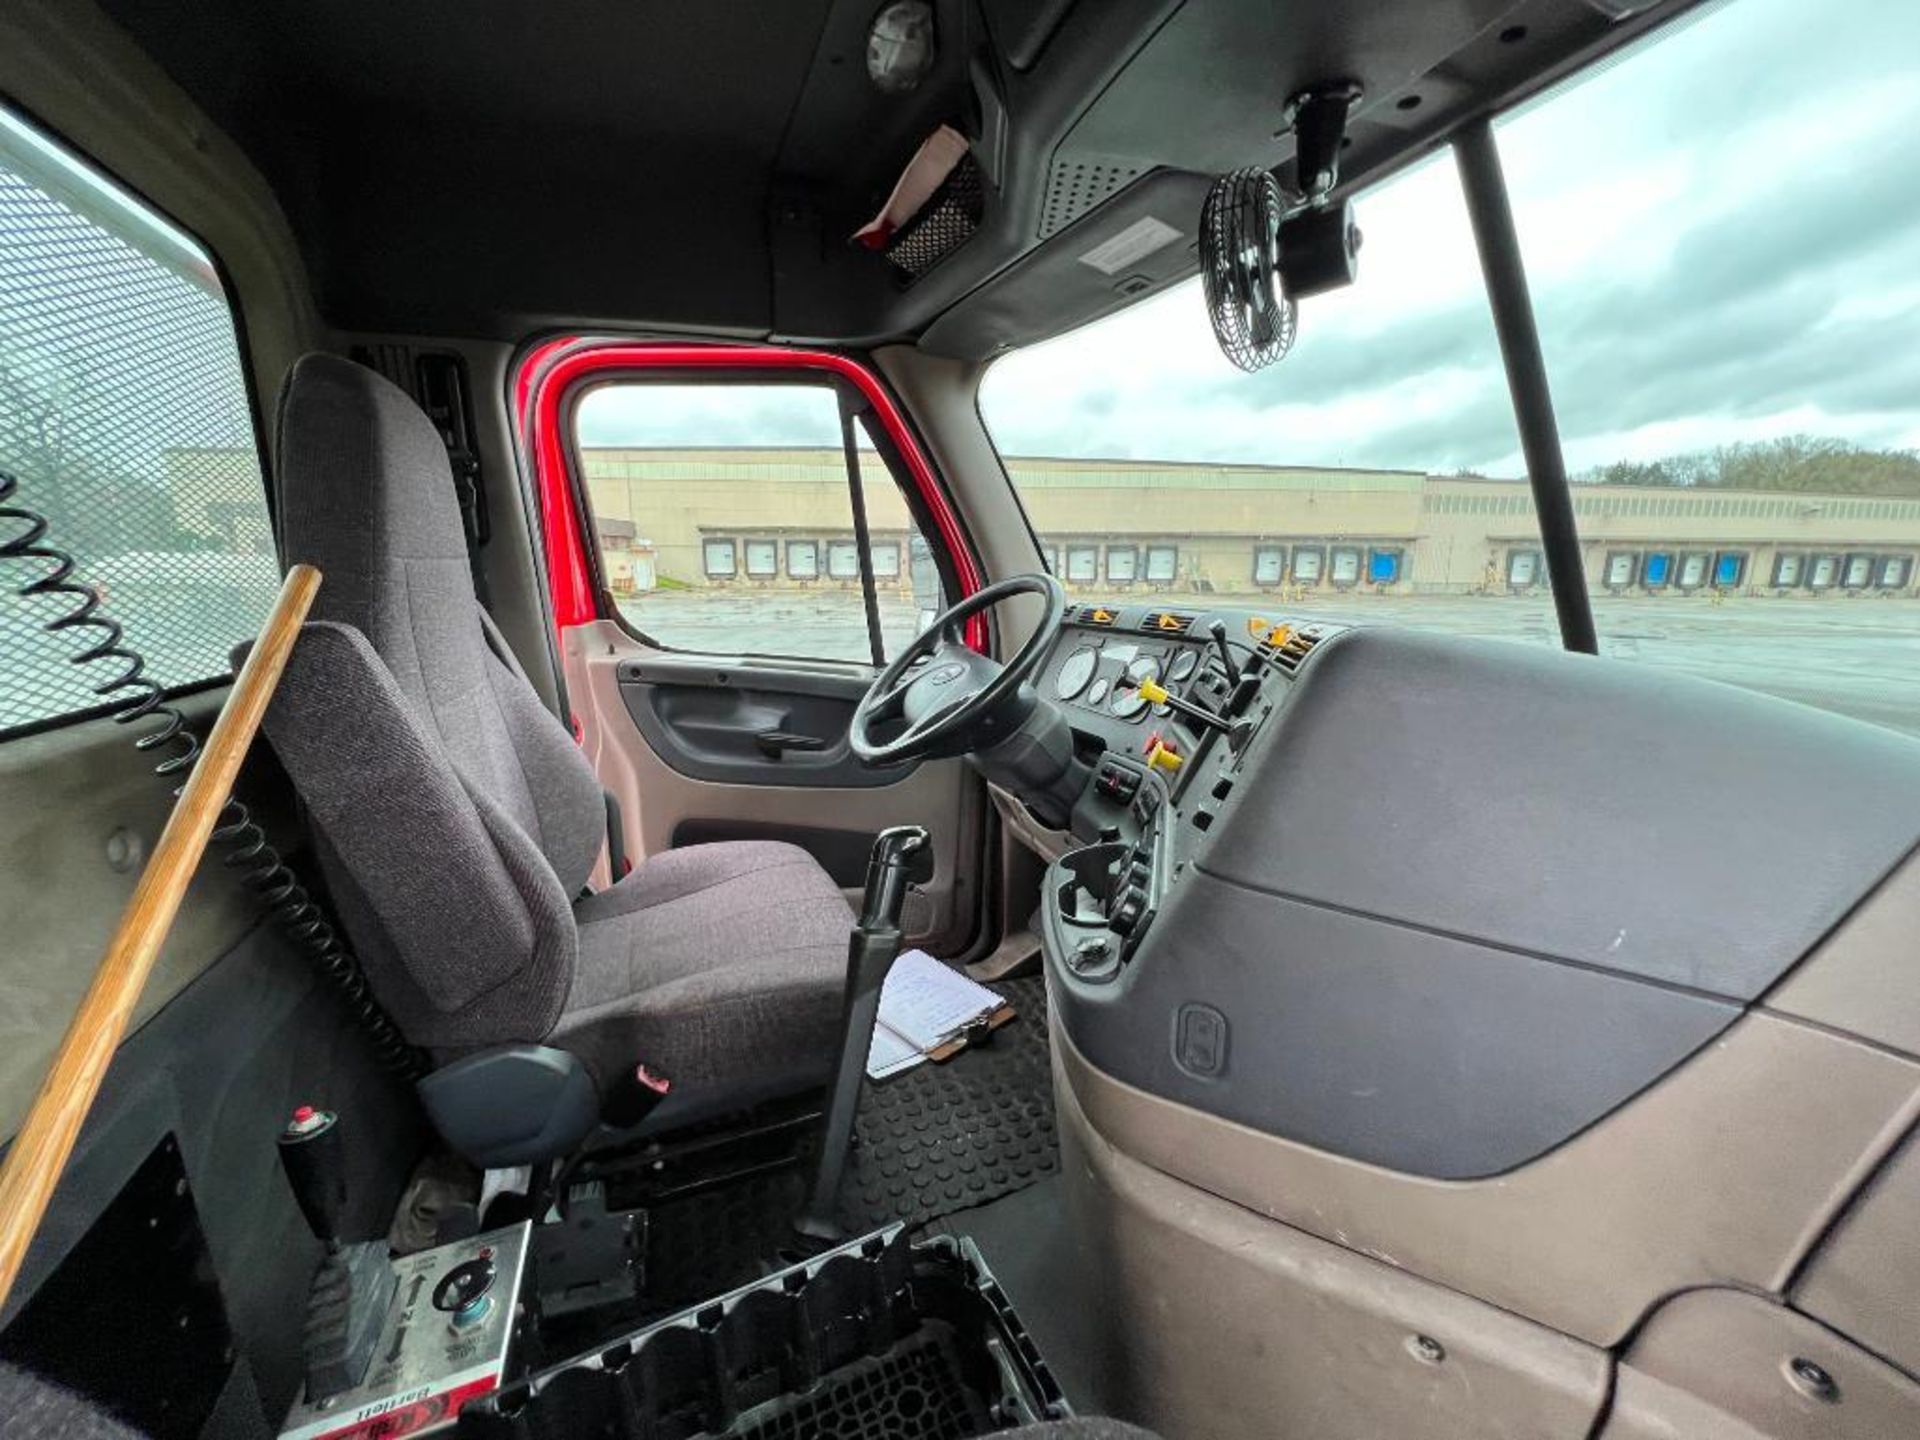 2013 Freightliner Cascadia Yard truck - Image 6 of 45